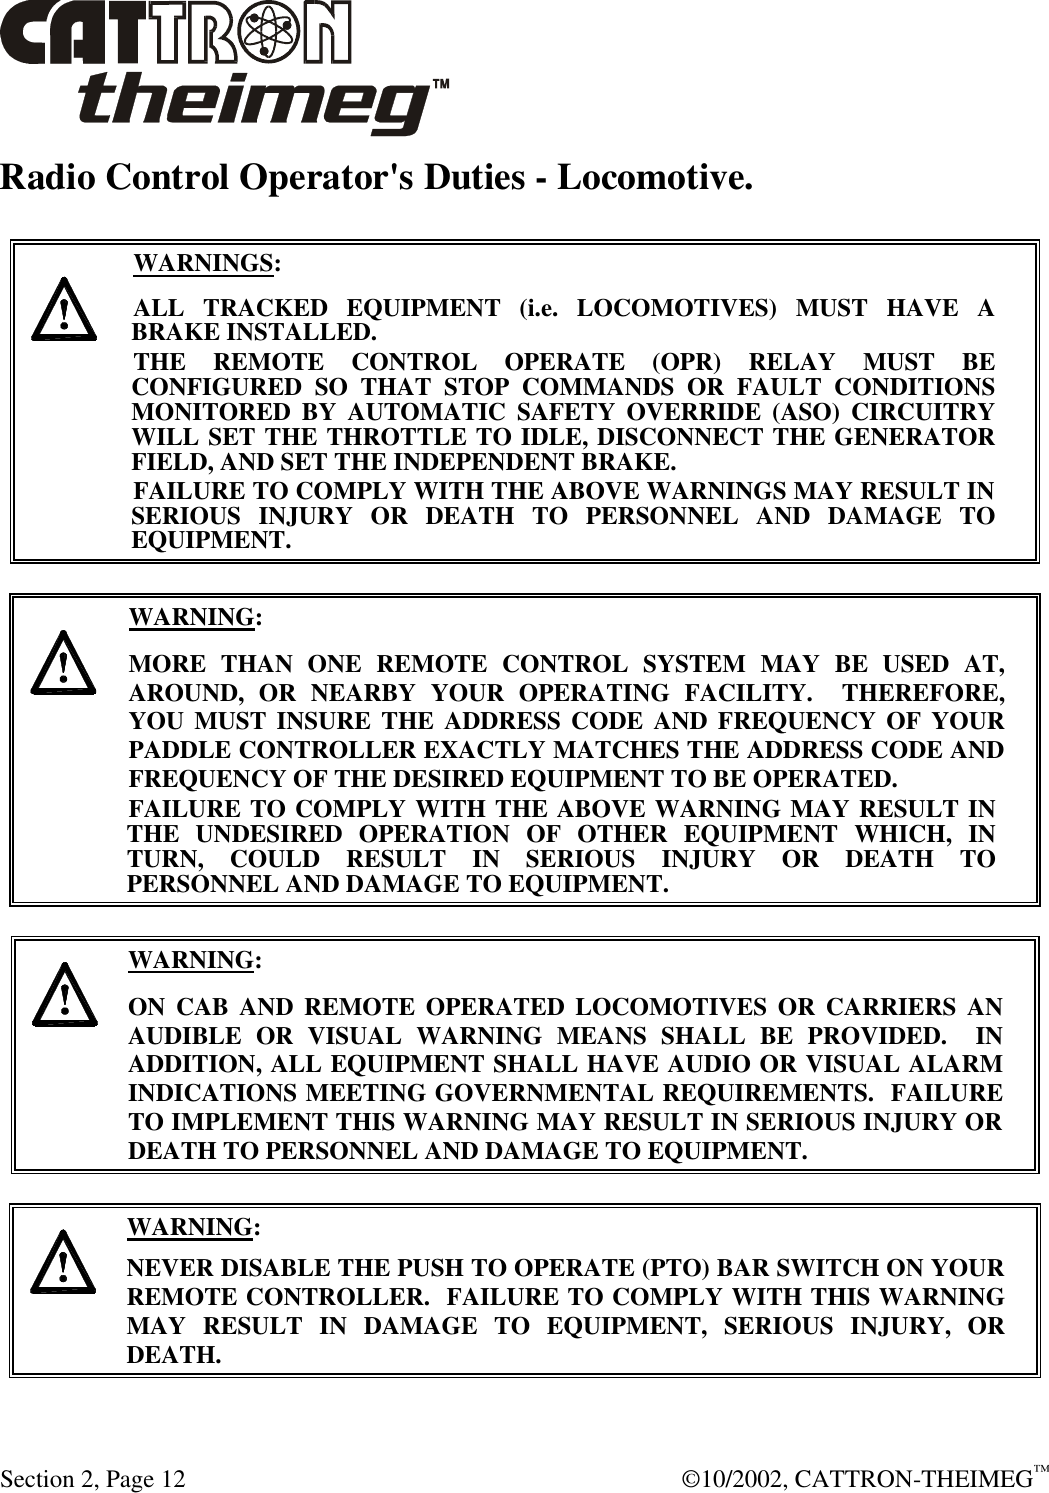  Section 2, Page 12  ©10/2002, CATTRON-THEIMEG™ Radio Control Operator&apos;s Duties - Locomotive.      WARNINGS: ALL TRACKED EQUIPMENT (i.e. LOCOMOTIVES) MUST HAVE A BRAKE INSTALLED. THE REMOTE CONTROL OPERATE (OPR) RELAY MUST BE CONFIGURED SO THAT STOP COMMANDS OR FAULT CONDITIONS MONITORED BY AUTOMATIC SAFETY OVERRIDE (ASO) CIRCUITRY WILL SET THE THROTTLE TO IDLE, DISCONNECT THE GENERATOR FIELD, AND SET THE INDEPENDENT BRAKE.  FAILURE TO COMPLY WITH THE ABOVE WARNINGS MAY RESULT IN SERIOUS INJURY OR DEATH TO PERSONNEL AND DAMAGE TO EQUIPMENT.       WARNING: MORE THAN ONE REMOTE CONTROL SYSTEM MAY BE USED AT, AROUND, OR NEARBY YOUR OPERATING FACILITY.  THEREFORE, YOU MUST INSURE THE ADDRESS CODE AND FREQUENCY OF YOUR PADDLE CONTROLLER EXACTLY MATCHES THE ADDRESS CODE AND FREQUENCY OF THE DESIRED EQUIPMENT TO BE OPERATED. FAILURE TO COMPLY WITH THE ABOVE WARNING MAY RESULT IN THE UNDESIRED OPERATION OF OTHER EQUIPMENT WHICH, IN TURN, COULD RESULT IN SERIOUS INJURY OR DEATH TO PERSONNEL AND DAMAGE TO EQUIPMENT.       WARNING: ON CAB AND REMOTE OPERATED LOCOMOTIVES OR CARRIERS AN AUDIBLE OR VISUAL WARNING MEANS SHALL BE PROVIDED.  IN ADDITION, ALL EQUIPMENT SHALL HAVE AUDIO OR VISUAL ALARM INDICATIONS MEETING GOVERNMENTAL REQUIREMENTS.  FAILURE TO IMPLEMENT THIS WARNING MAY RESULT IN SERIOUS INJURY OR DEATH TO PERSONNEL AND DAMAGE TO EQUIPMENT.     WARNING: NEVER DISABLE THE PUSH TO OPERATE (PTO) BAR SWITCH ON YOUR REMOTE CONTROLLER.  FAILURE TO COMPLY WITH THIS WARNING MAY RESULT IN DAMAGE TO EQUIPMENT, SERIOUS INJURY, OR DEATH.    